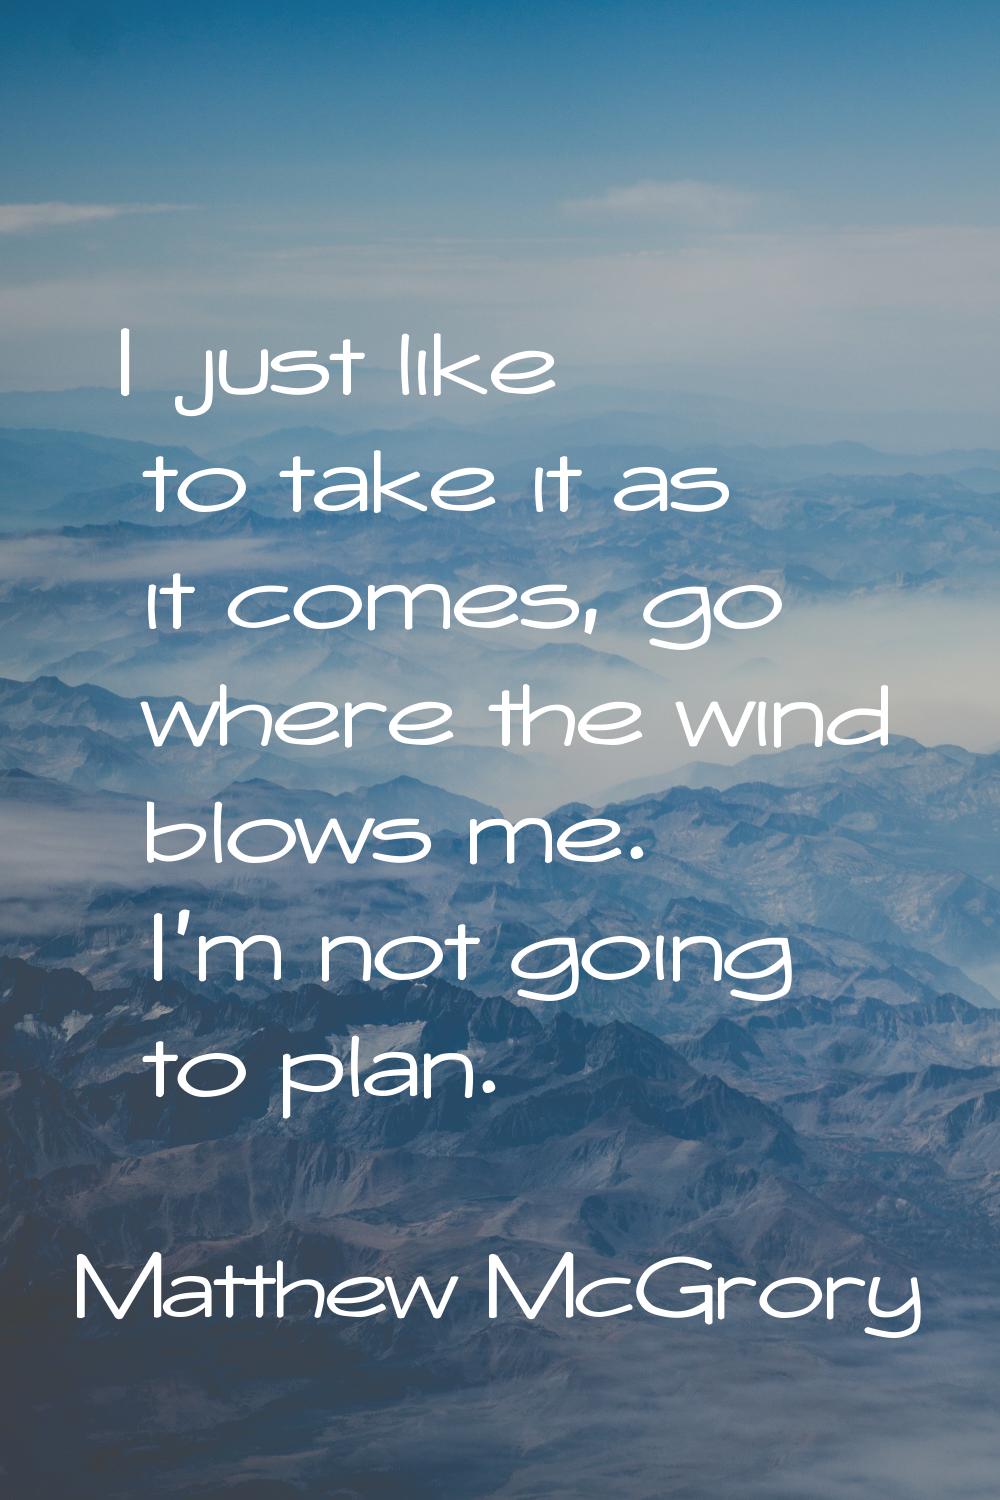 I just like to take it as it comes, go where the wind blows me. I'm not going to plan.